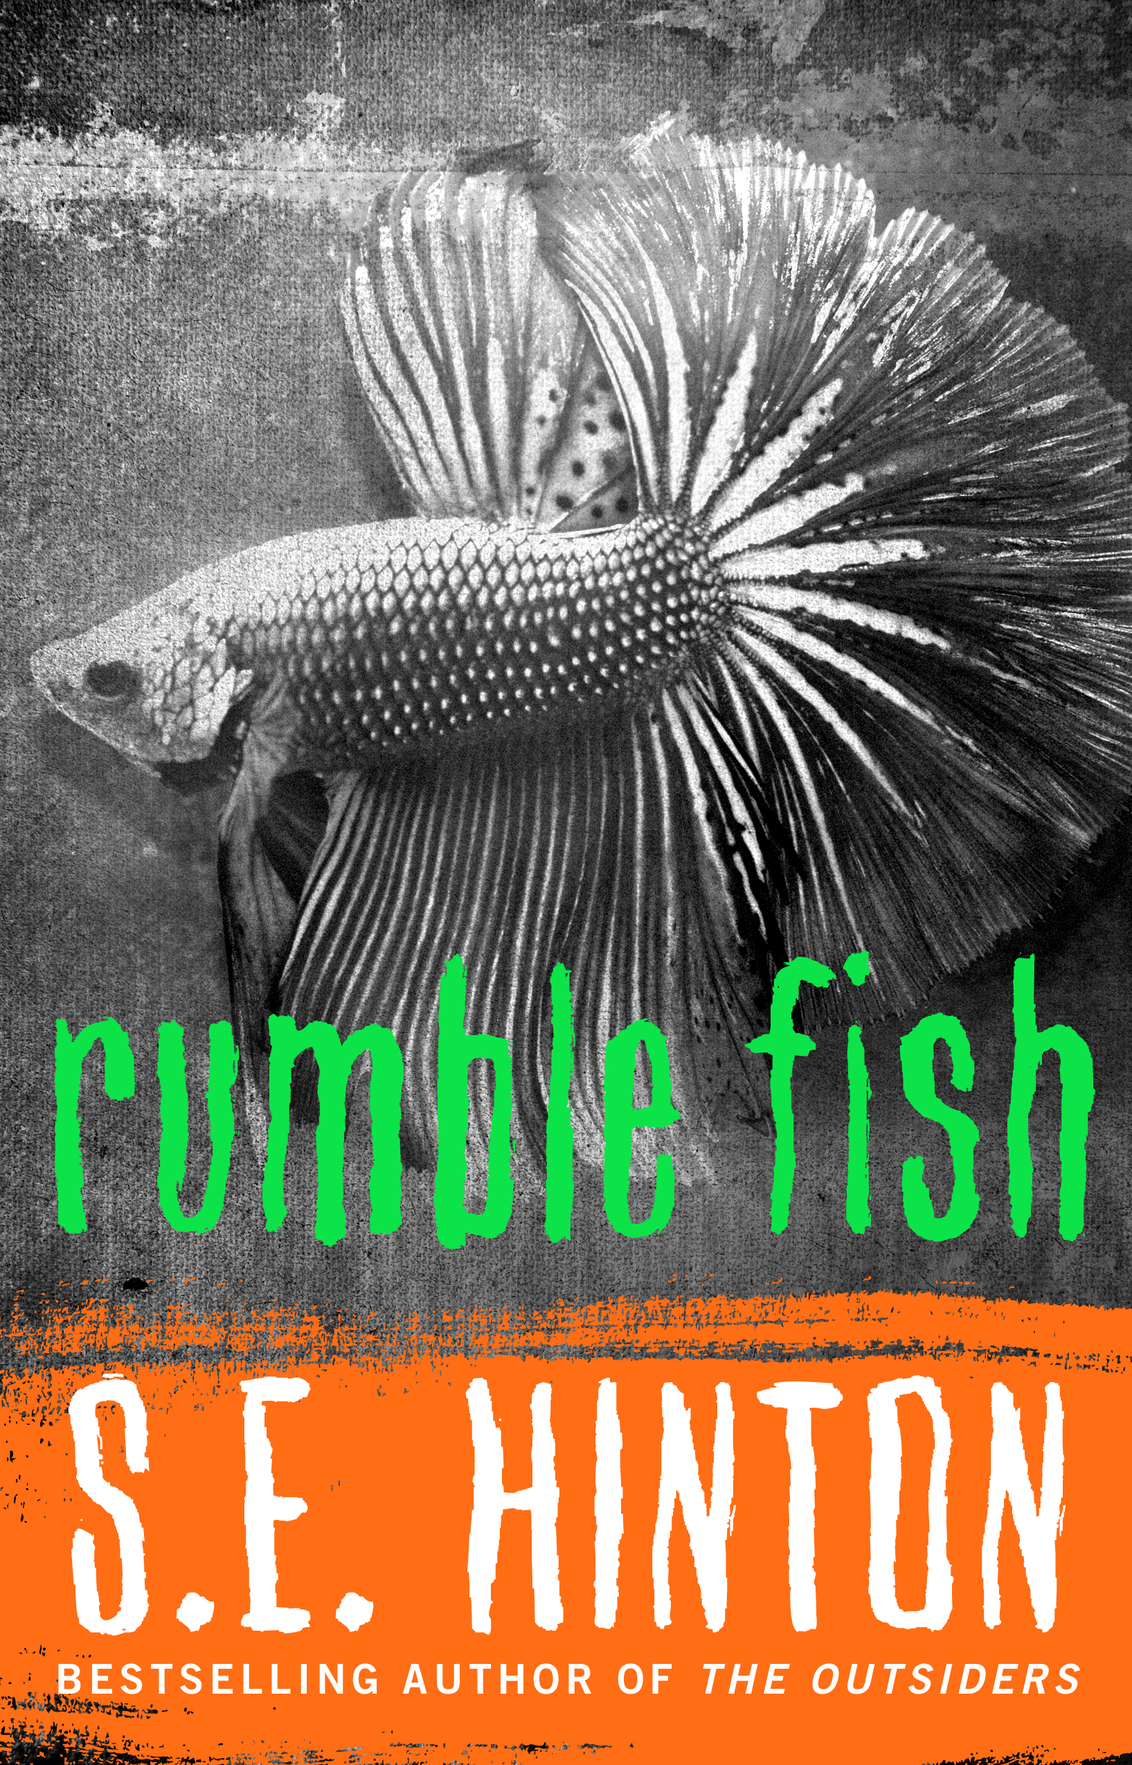 Read Rumble Fish by S. E. Hinton online free full book.